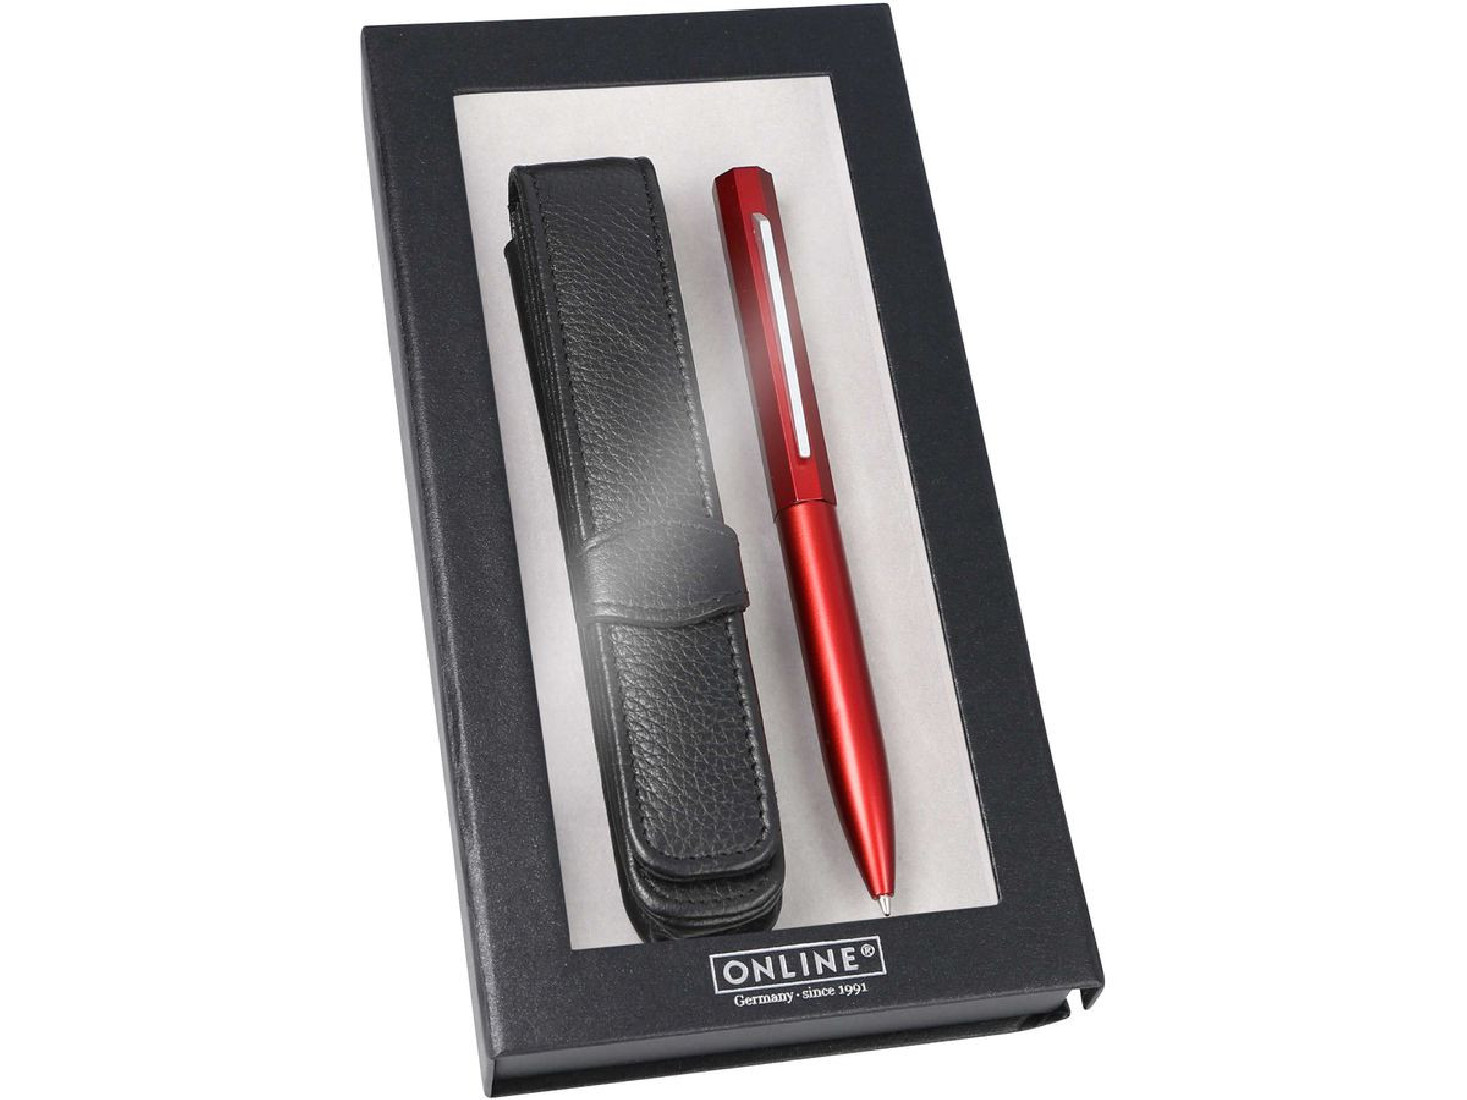 Ballpen Metal Octopen  Red with leather case 34692 Online